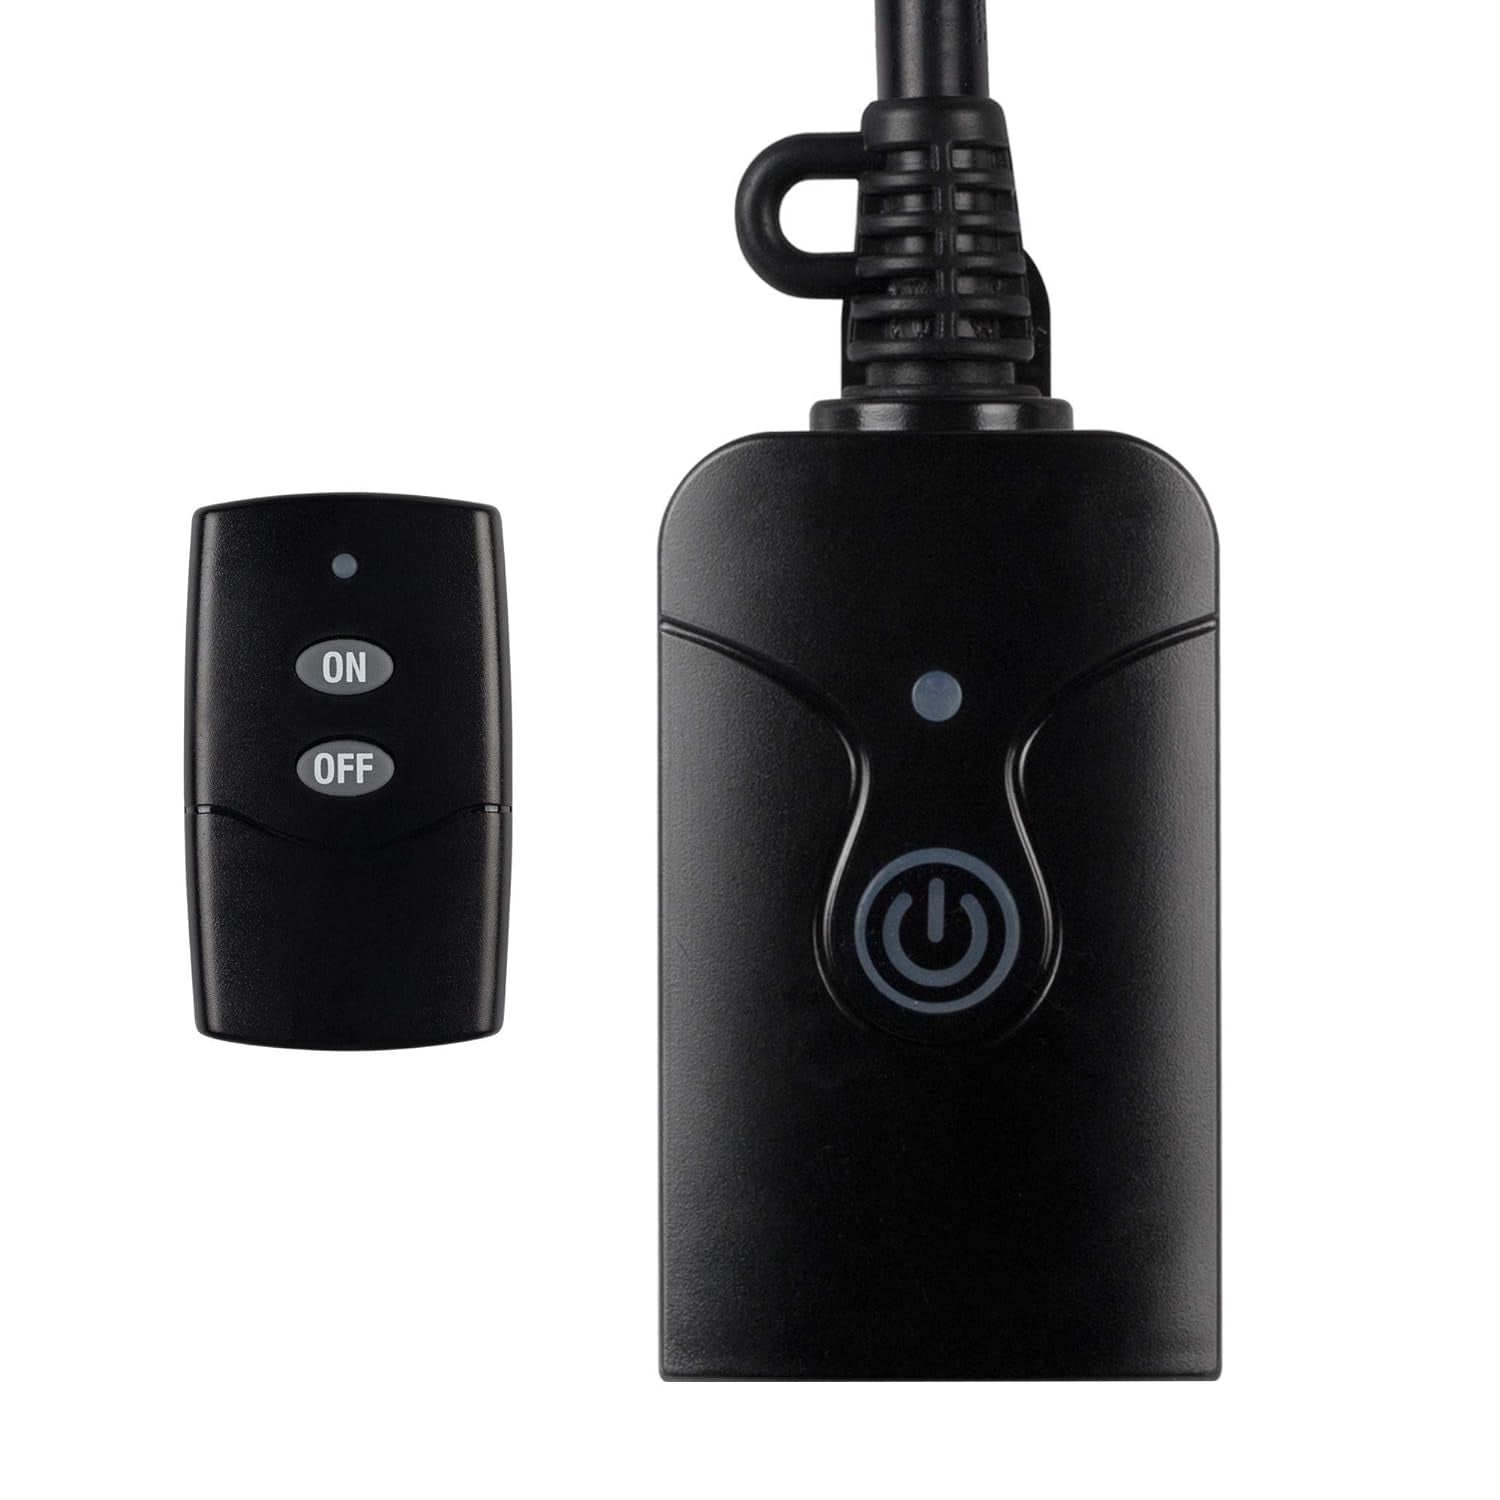 Outdoor Wireless Remote Control 3-Prong Outlet Weatherproof Heavy Duty Compact BN-LINK - BN-LINK